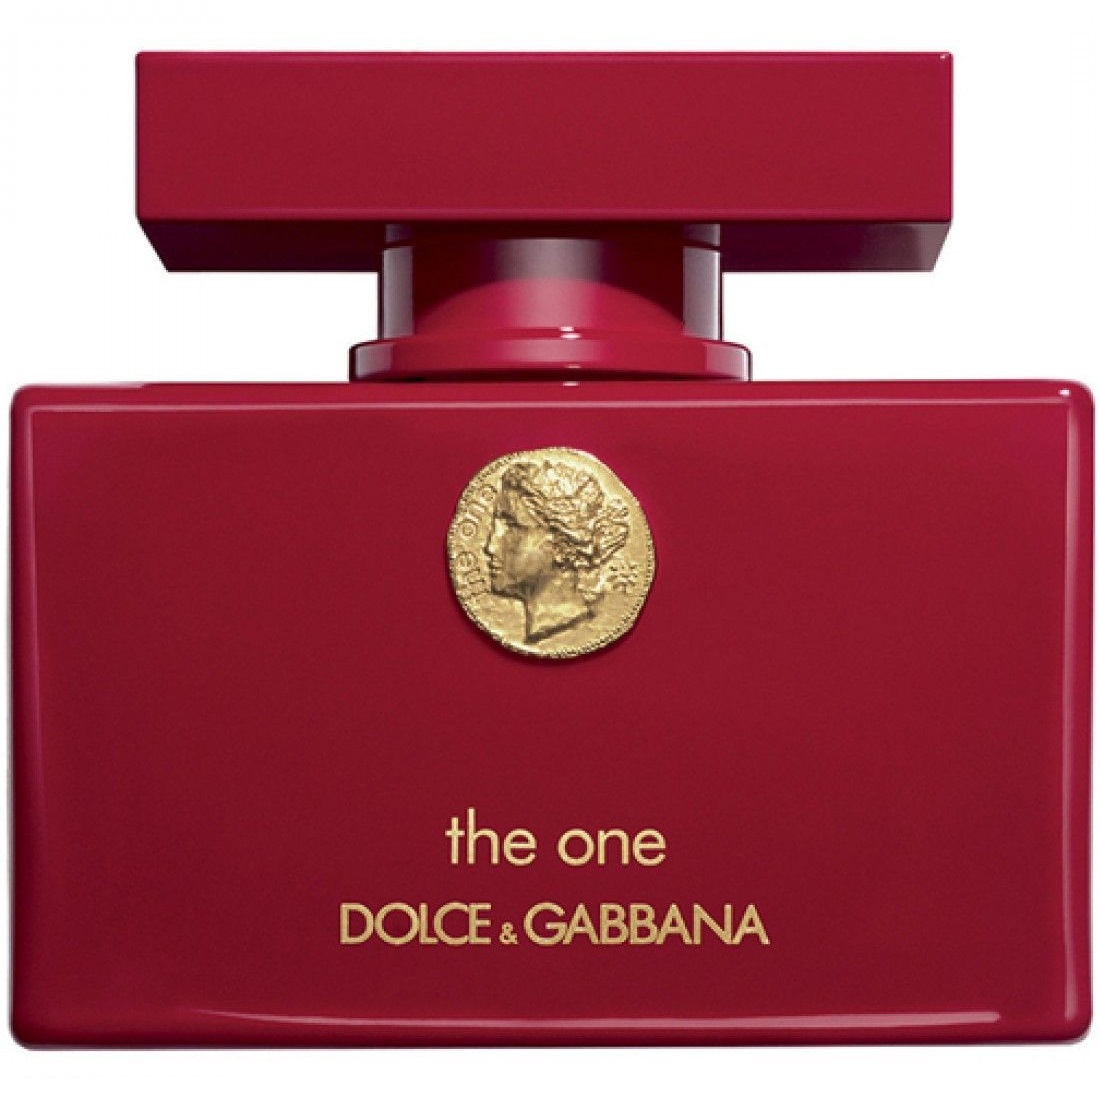 Dolce gabbana the one for woman. D&G the one Collector s Edition жен 75ml EDP 2014г.. Dolce Gabbana the one Collector Edition. Дольче Габбана the one 50 мл женские. Дольче Габбана 2014 Парфюм.